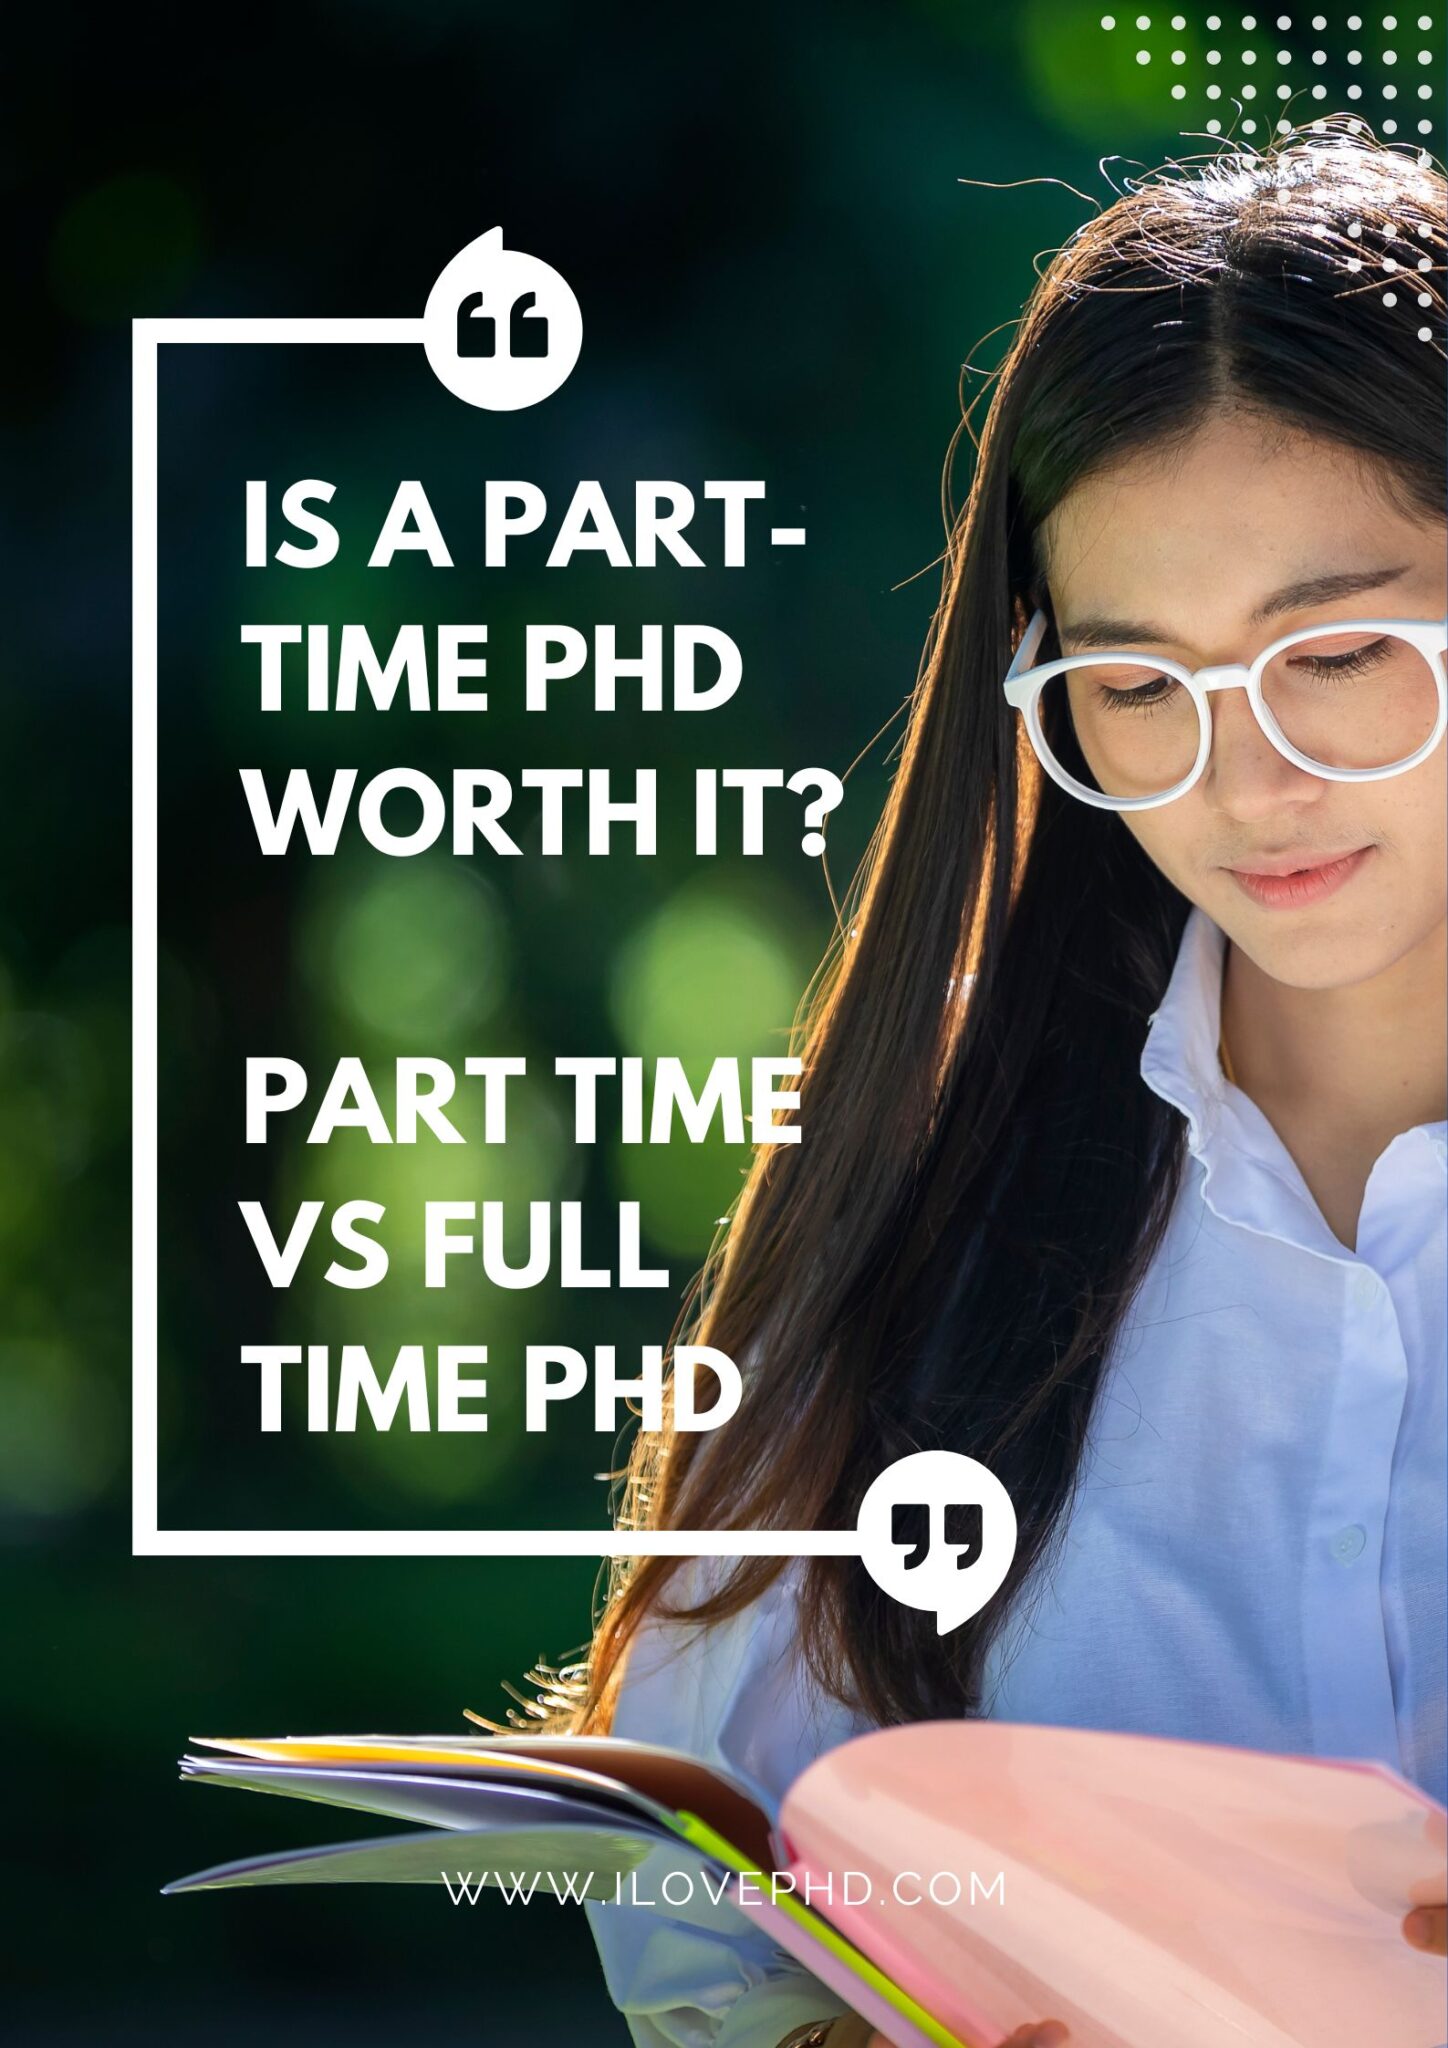 phd full time or part time